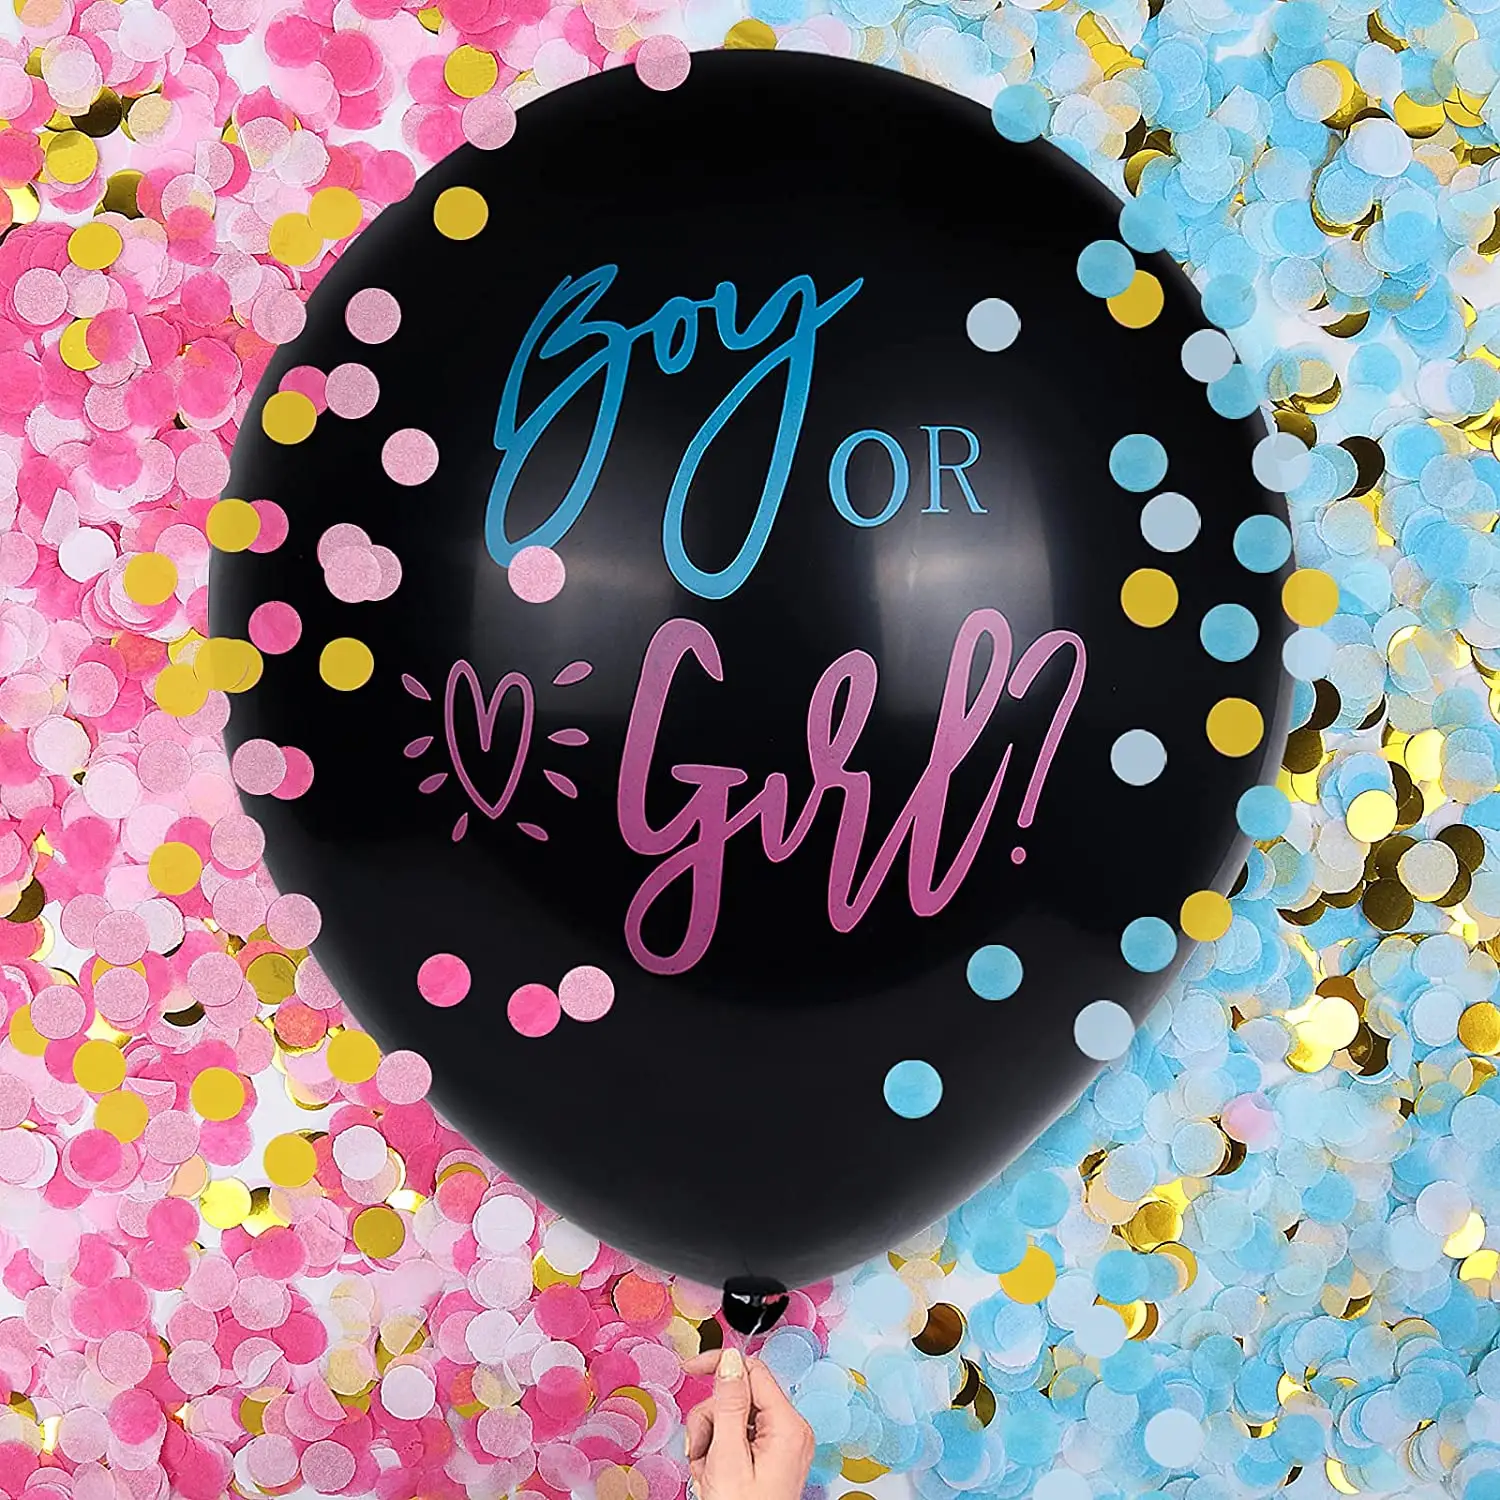 big size 36" Round Latex print balloons Gender Reveal party decoration balloons Confetti Baby Boy or Girl Balloon